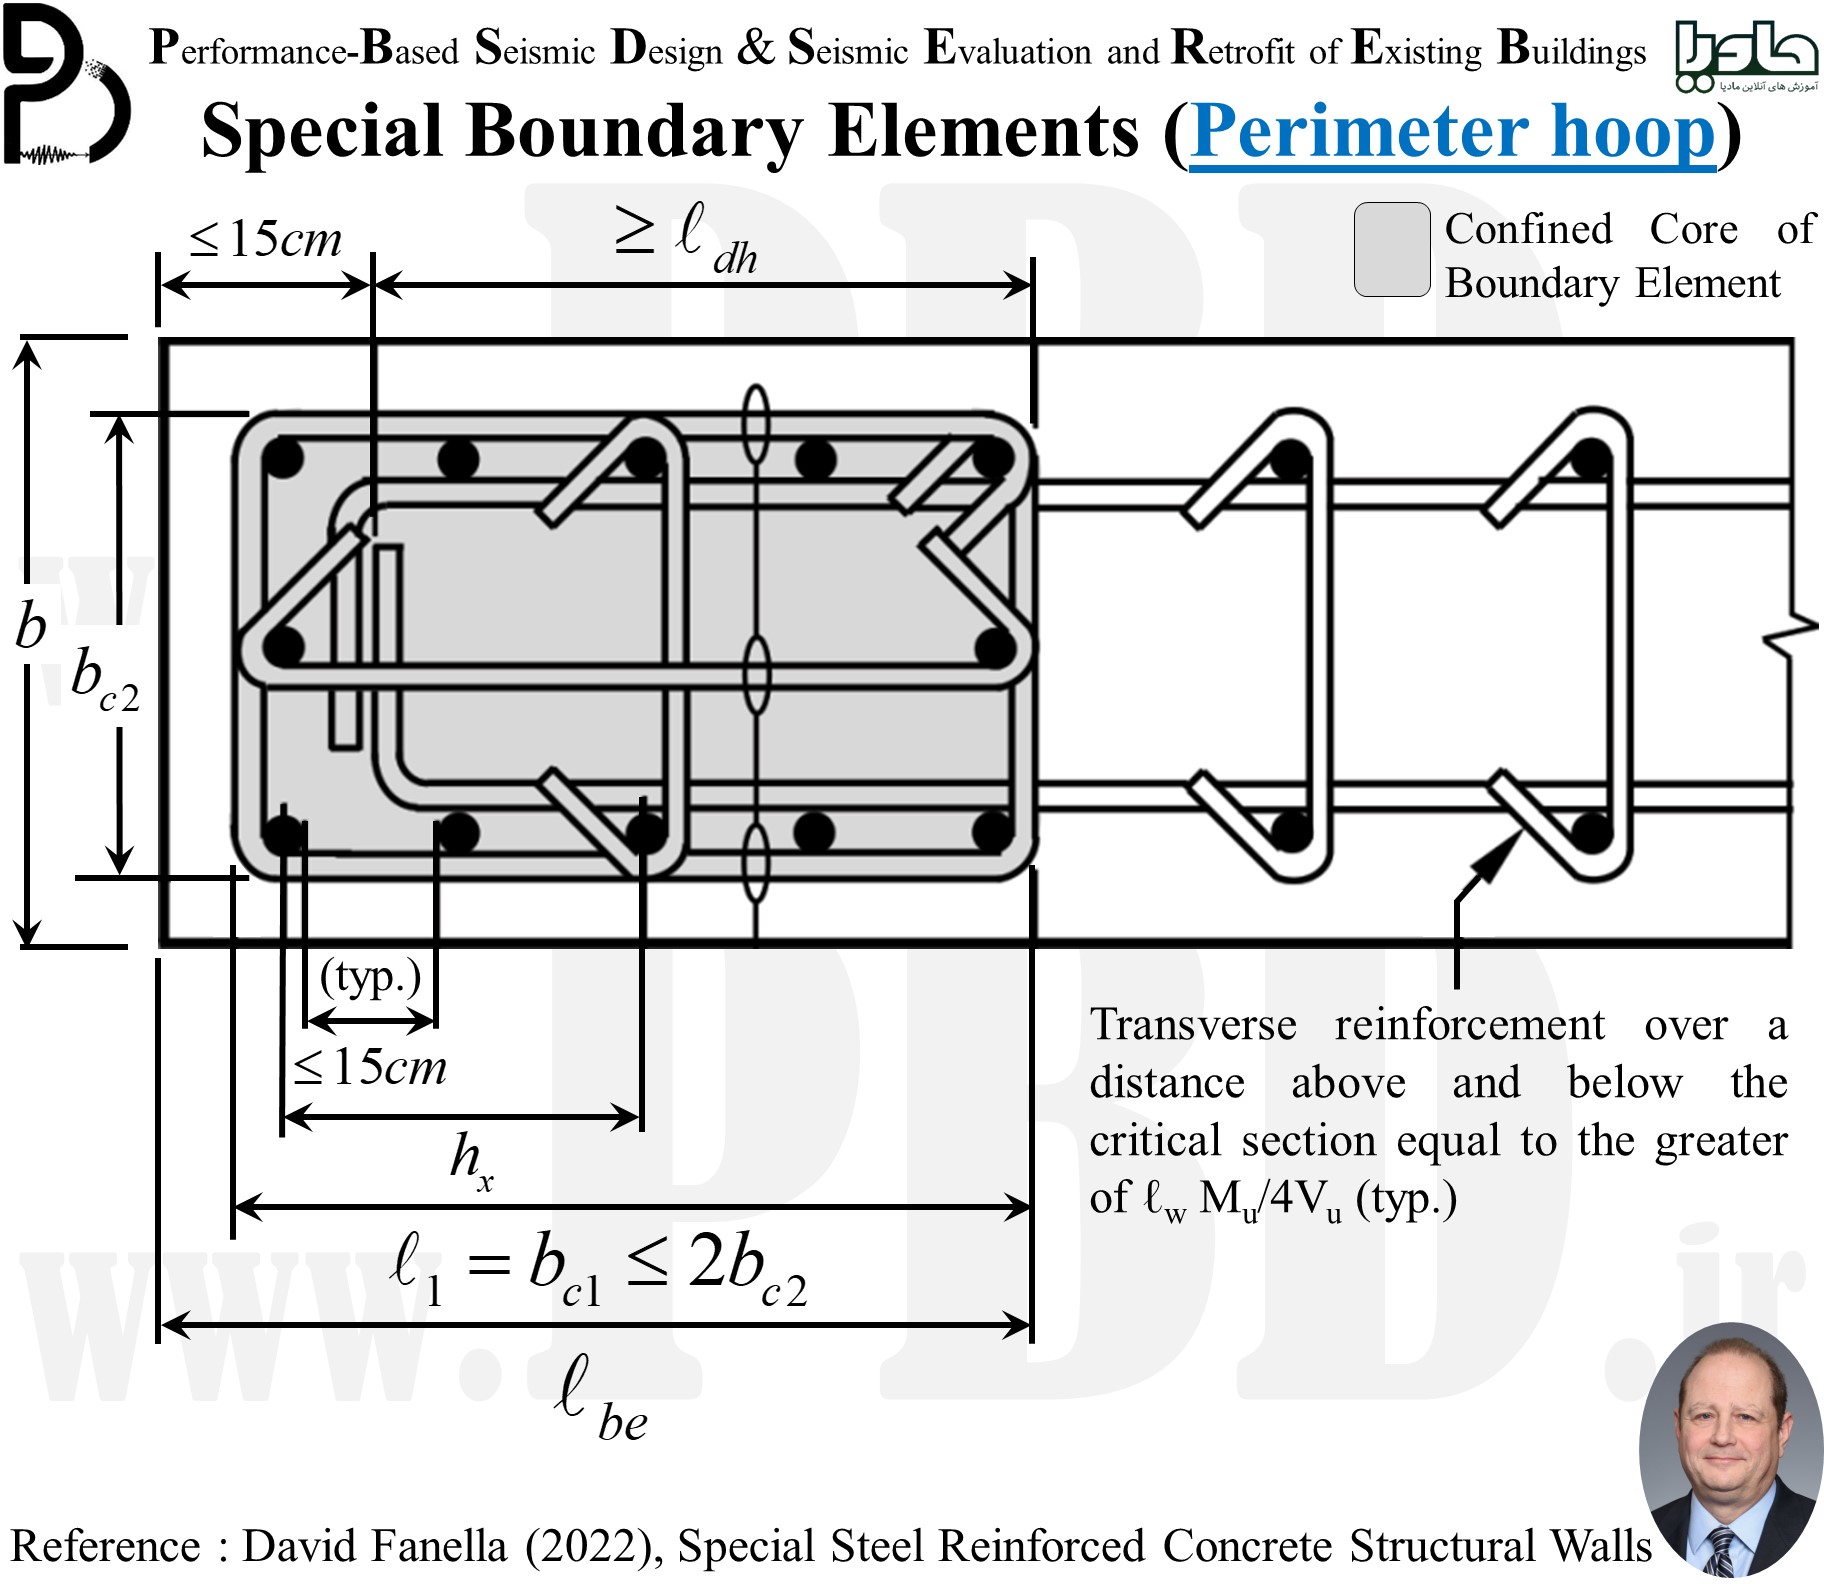 Special Boundary Elements with Perimeter Hoop